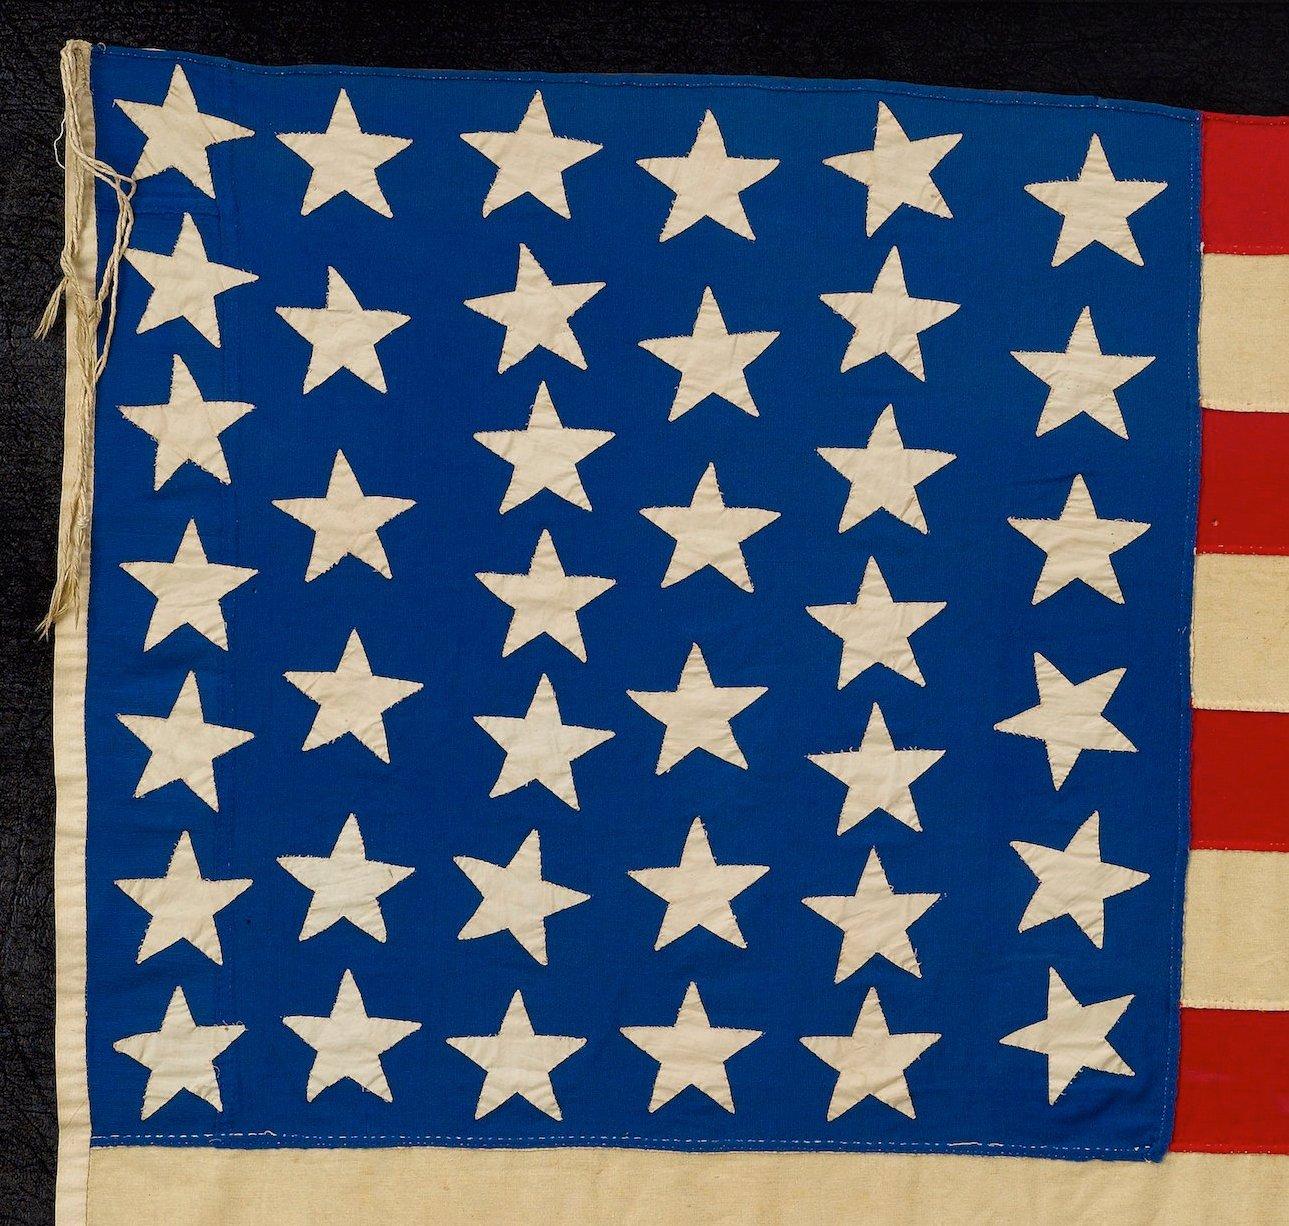 Presented is a 39-star American flag, dating to 1889 and celebrating North Dakota's statehood.  This very large family flag was fully hand-cut and sewn, impressive in both its construction and sheer size. The flag's canton features a 7-6-7-6-7-6